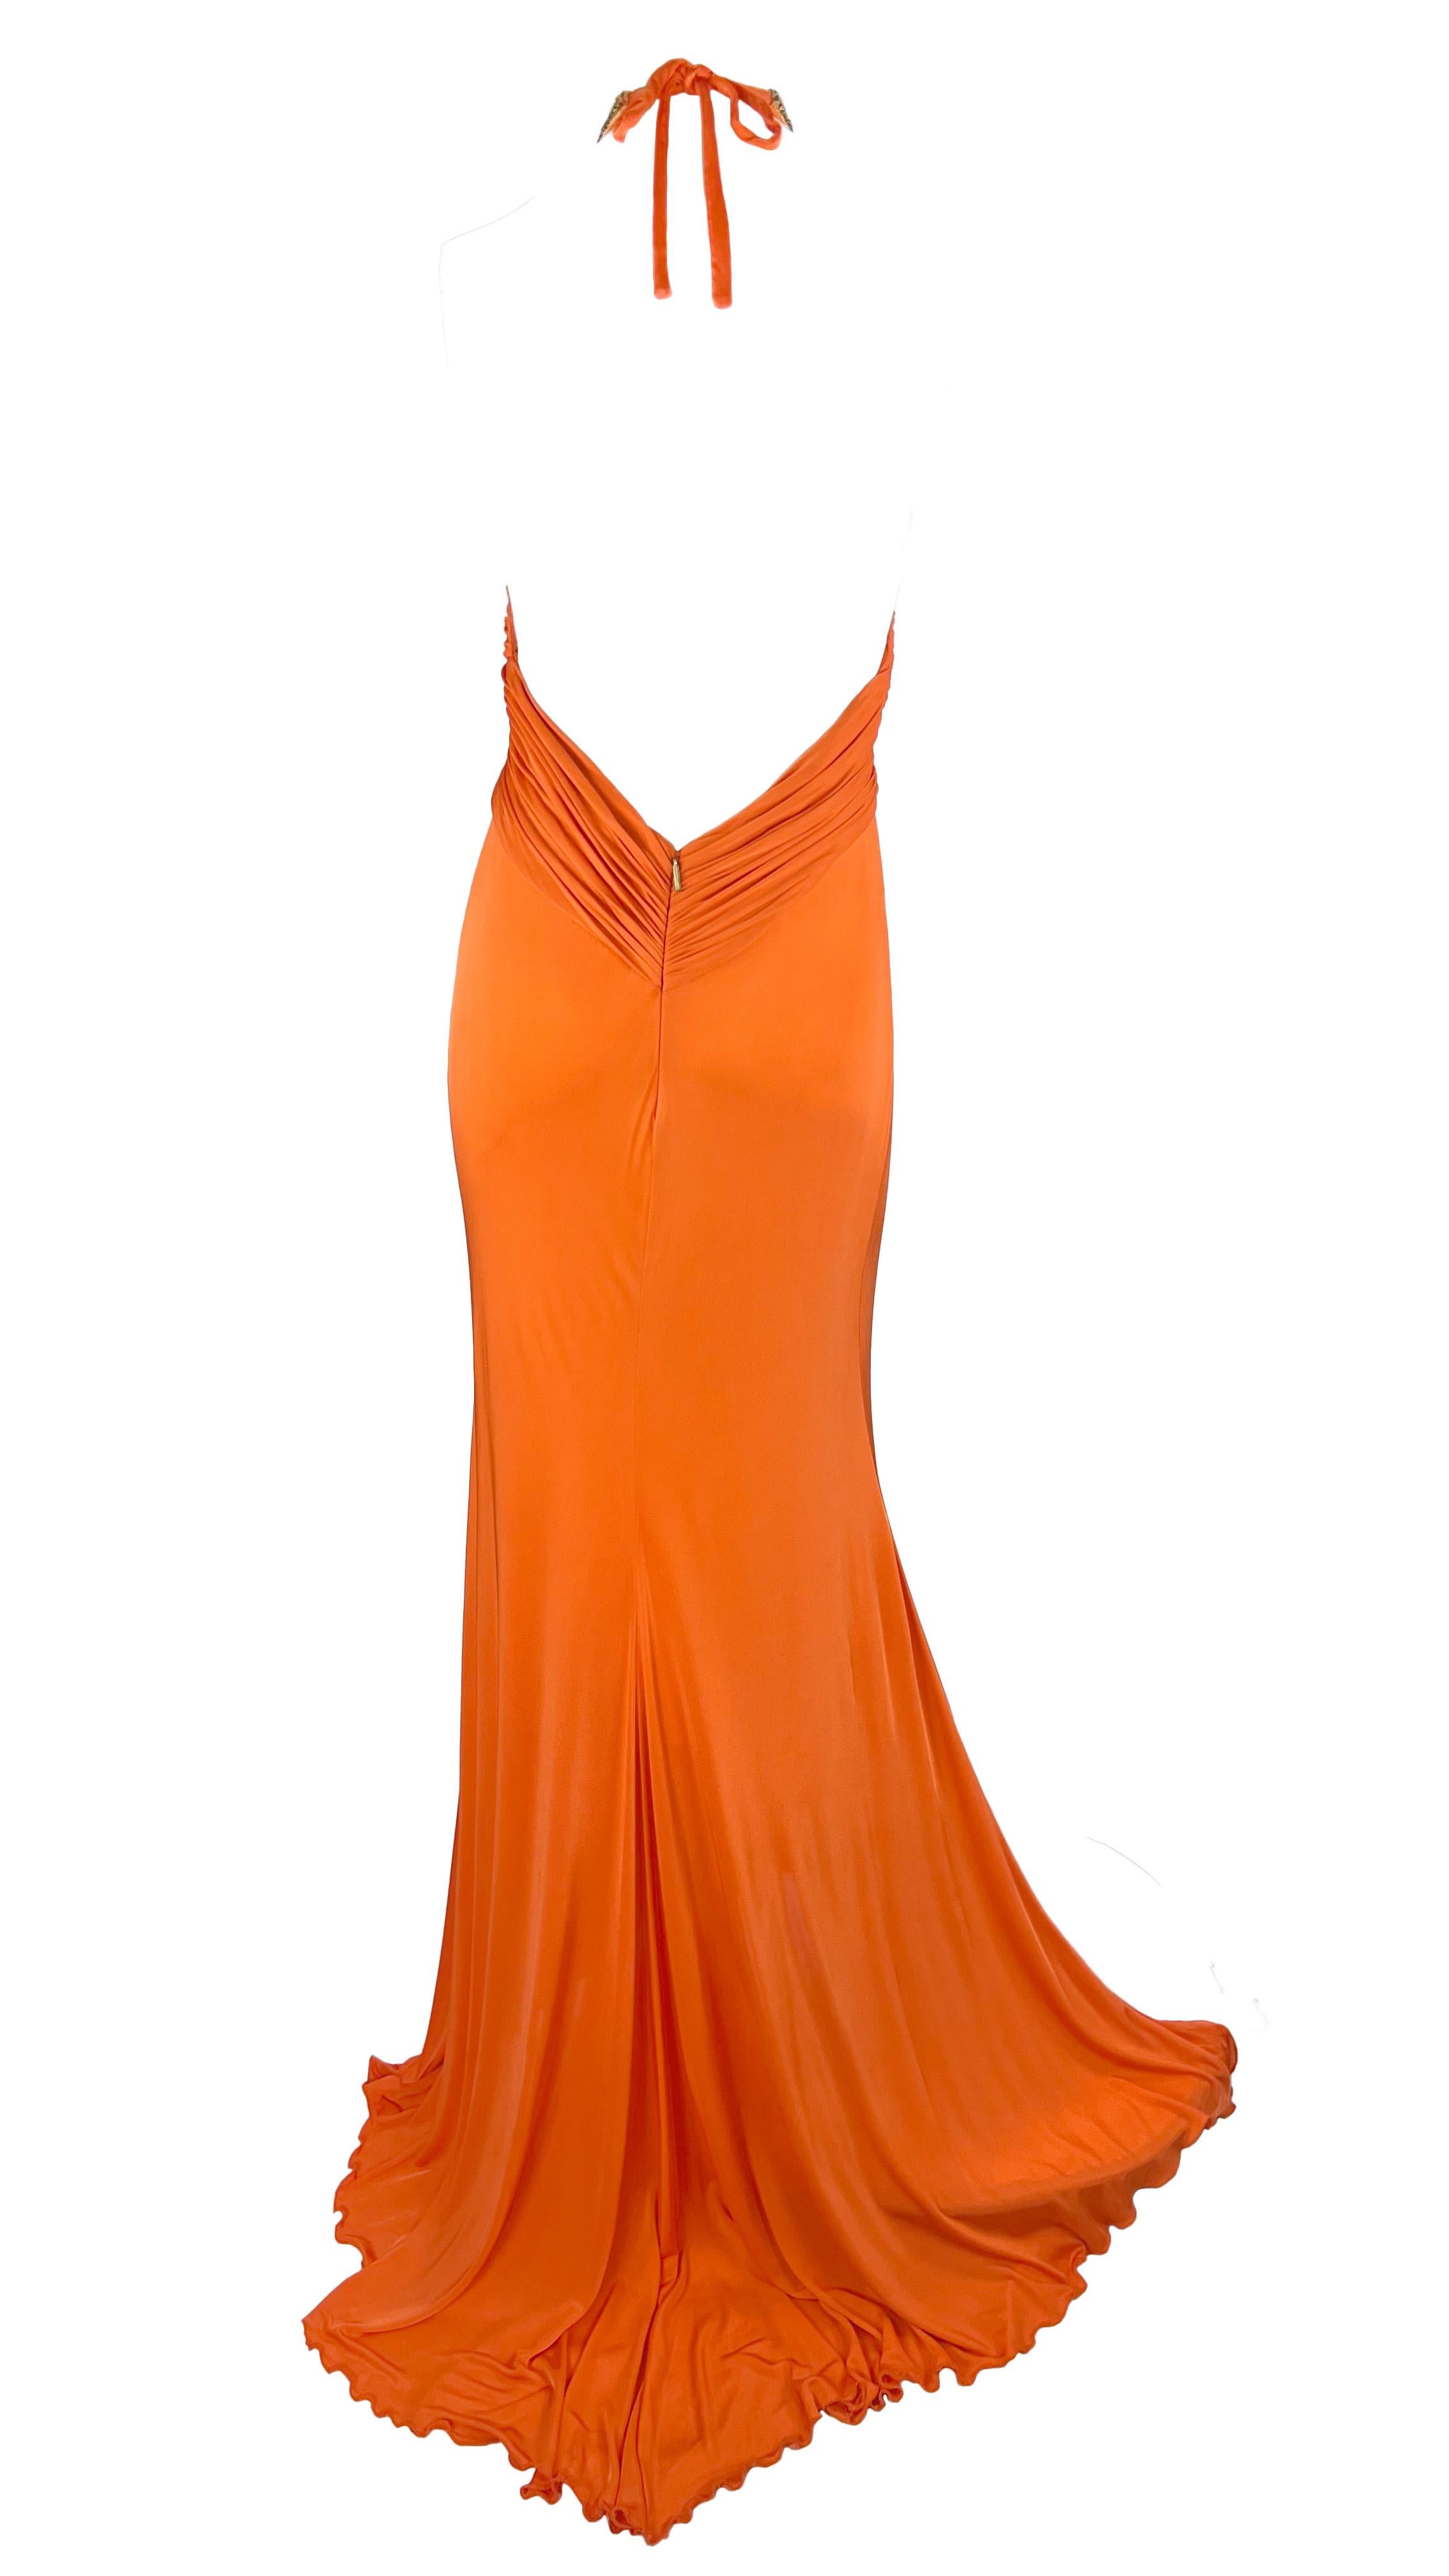 S/S 2005 Roberto Cavalli Backless Orange Bodycon Gold Sequin Plunging Gown For Sale 1